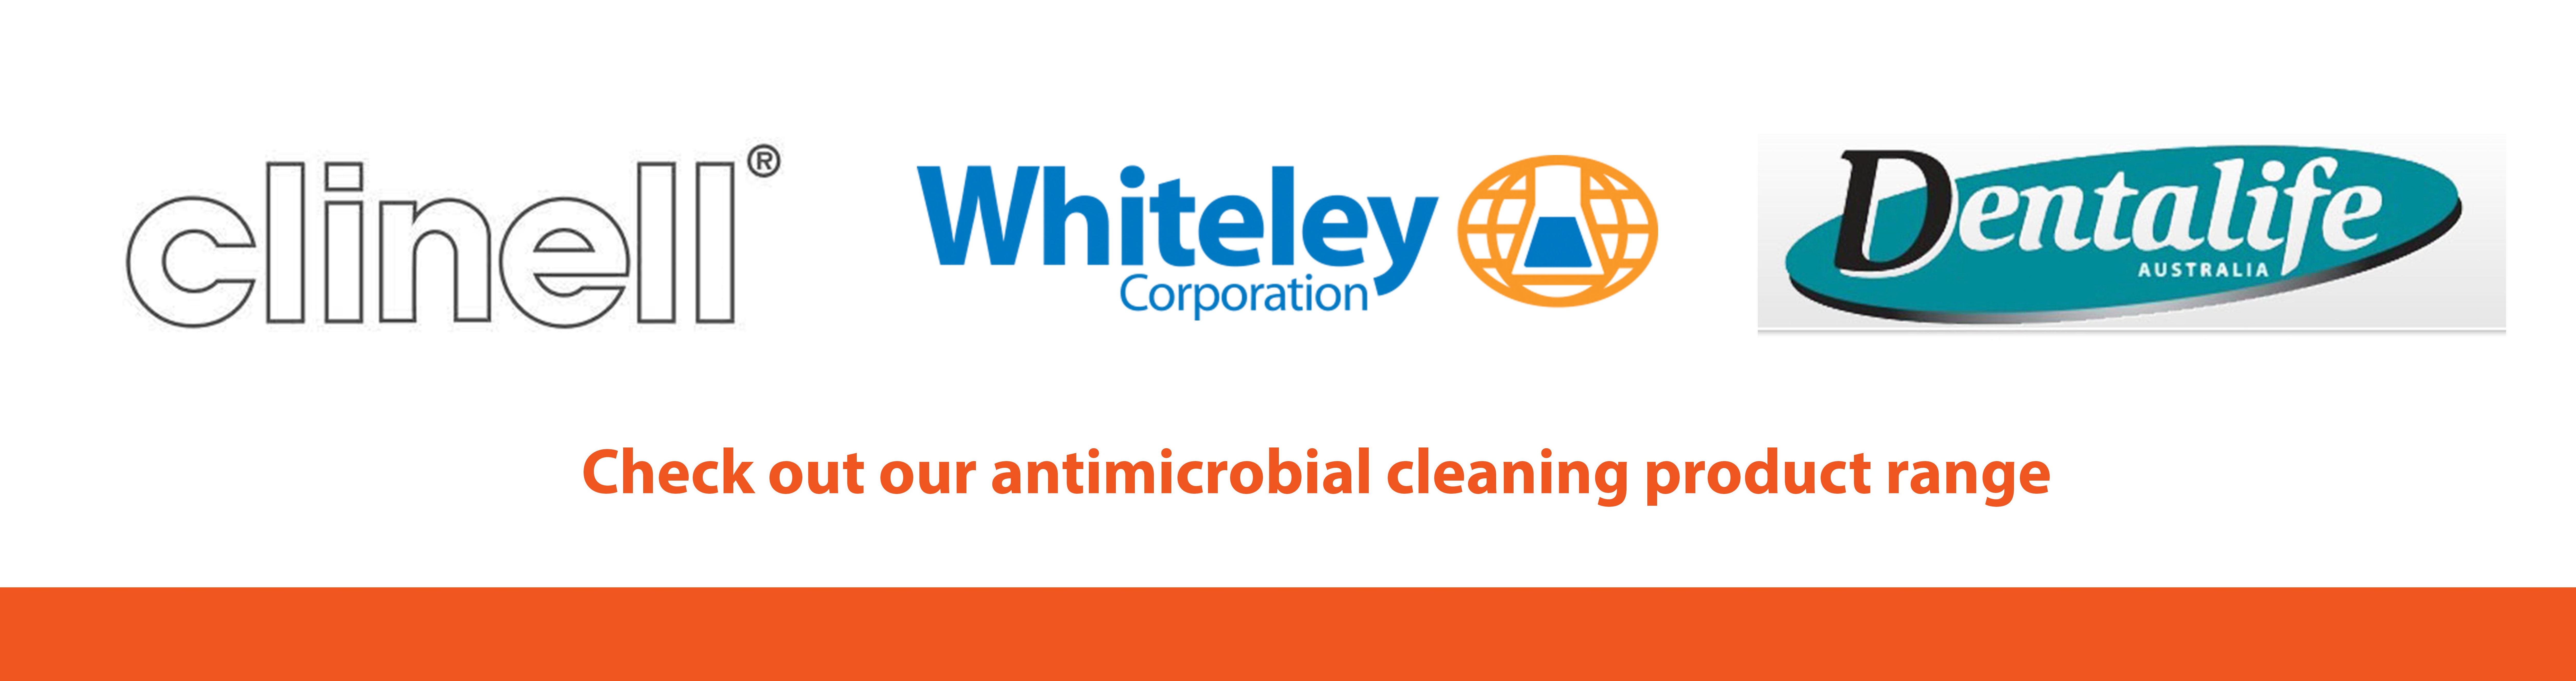 Check out our antimicrobial cleaning product range-2